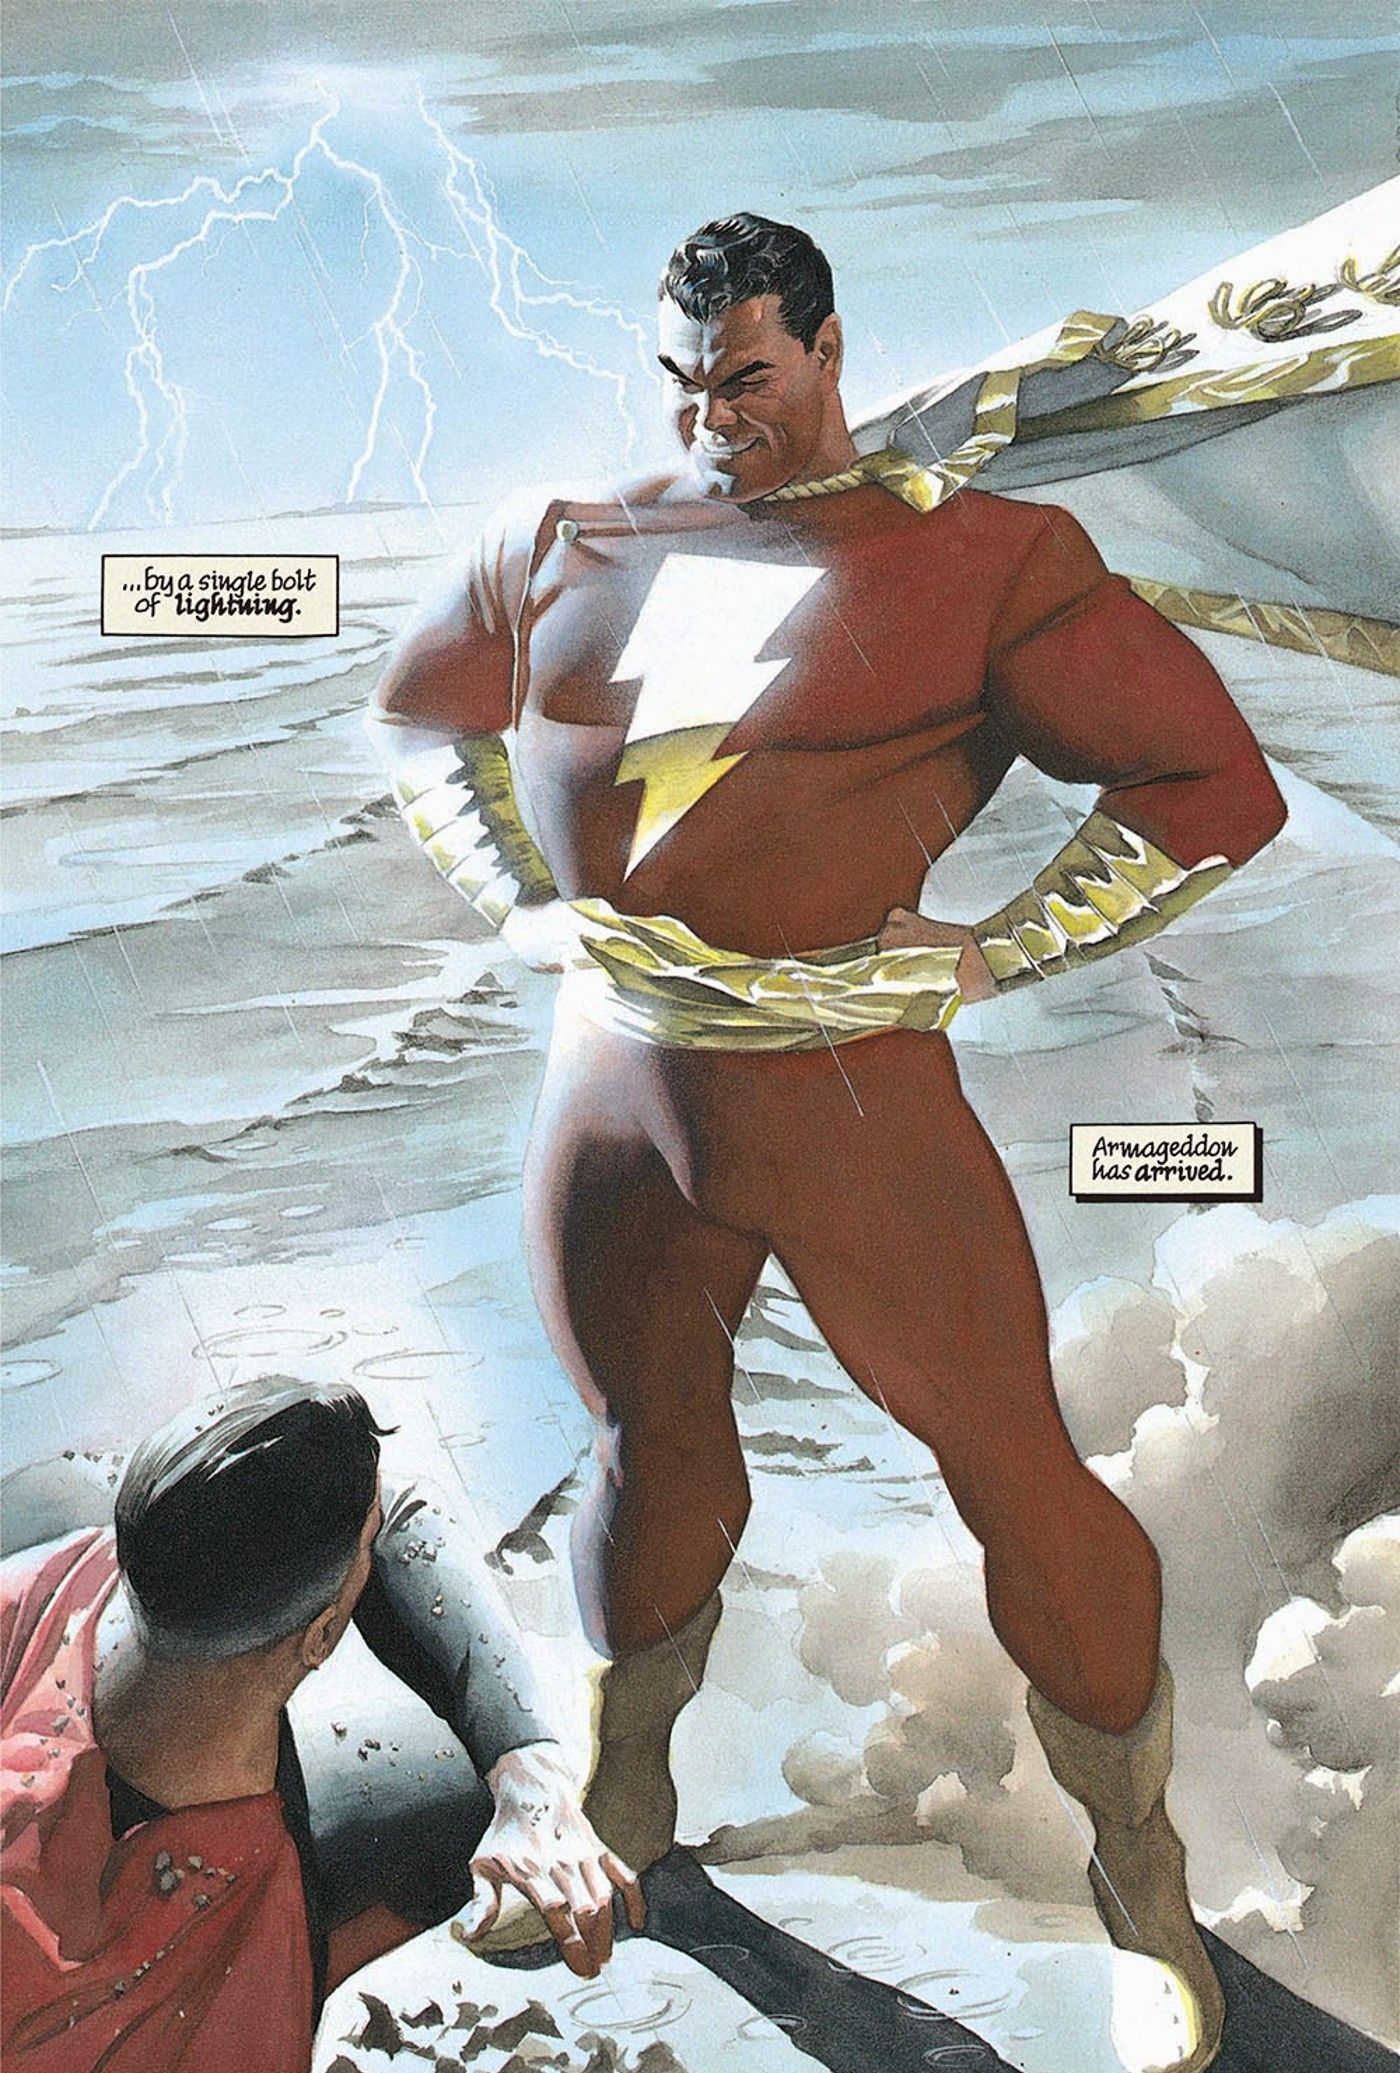 Single image of Shazam from Kingdom Come standing on the beach over Superman